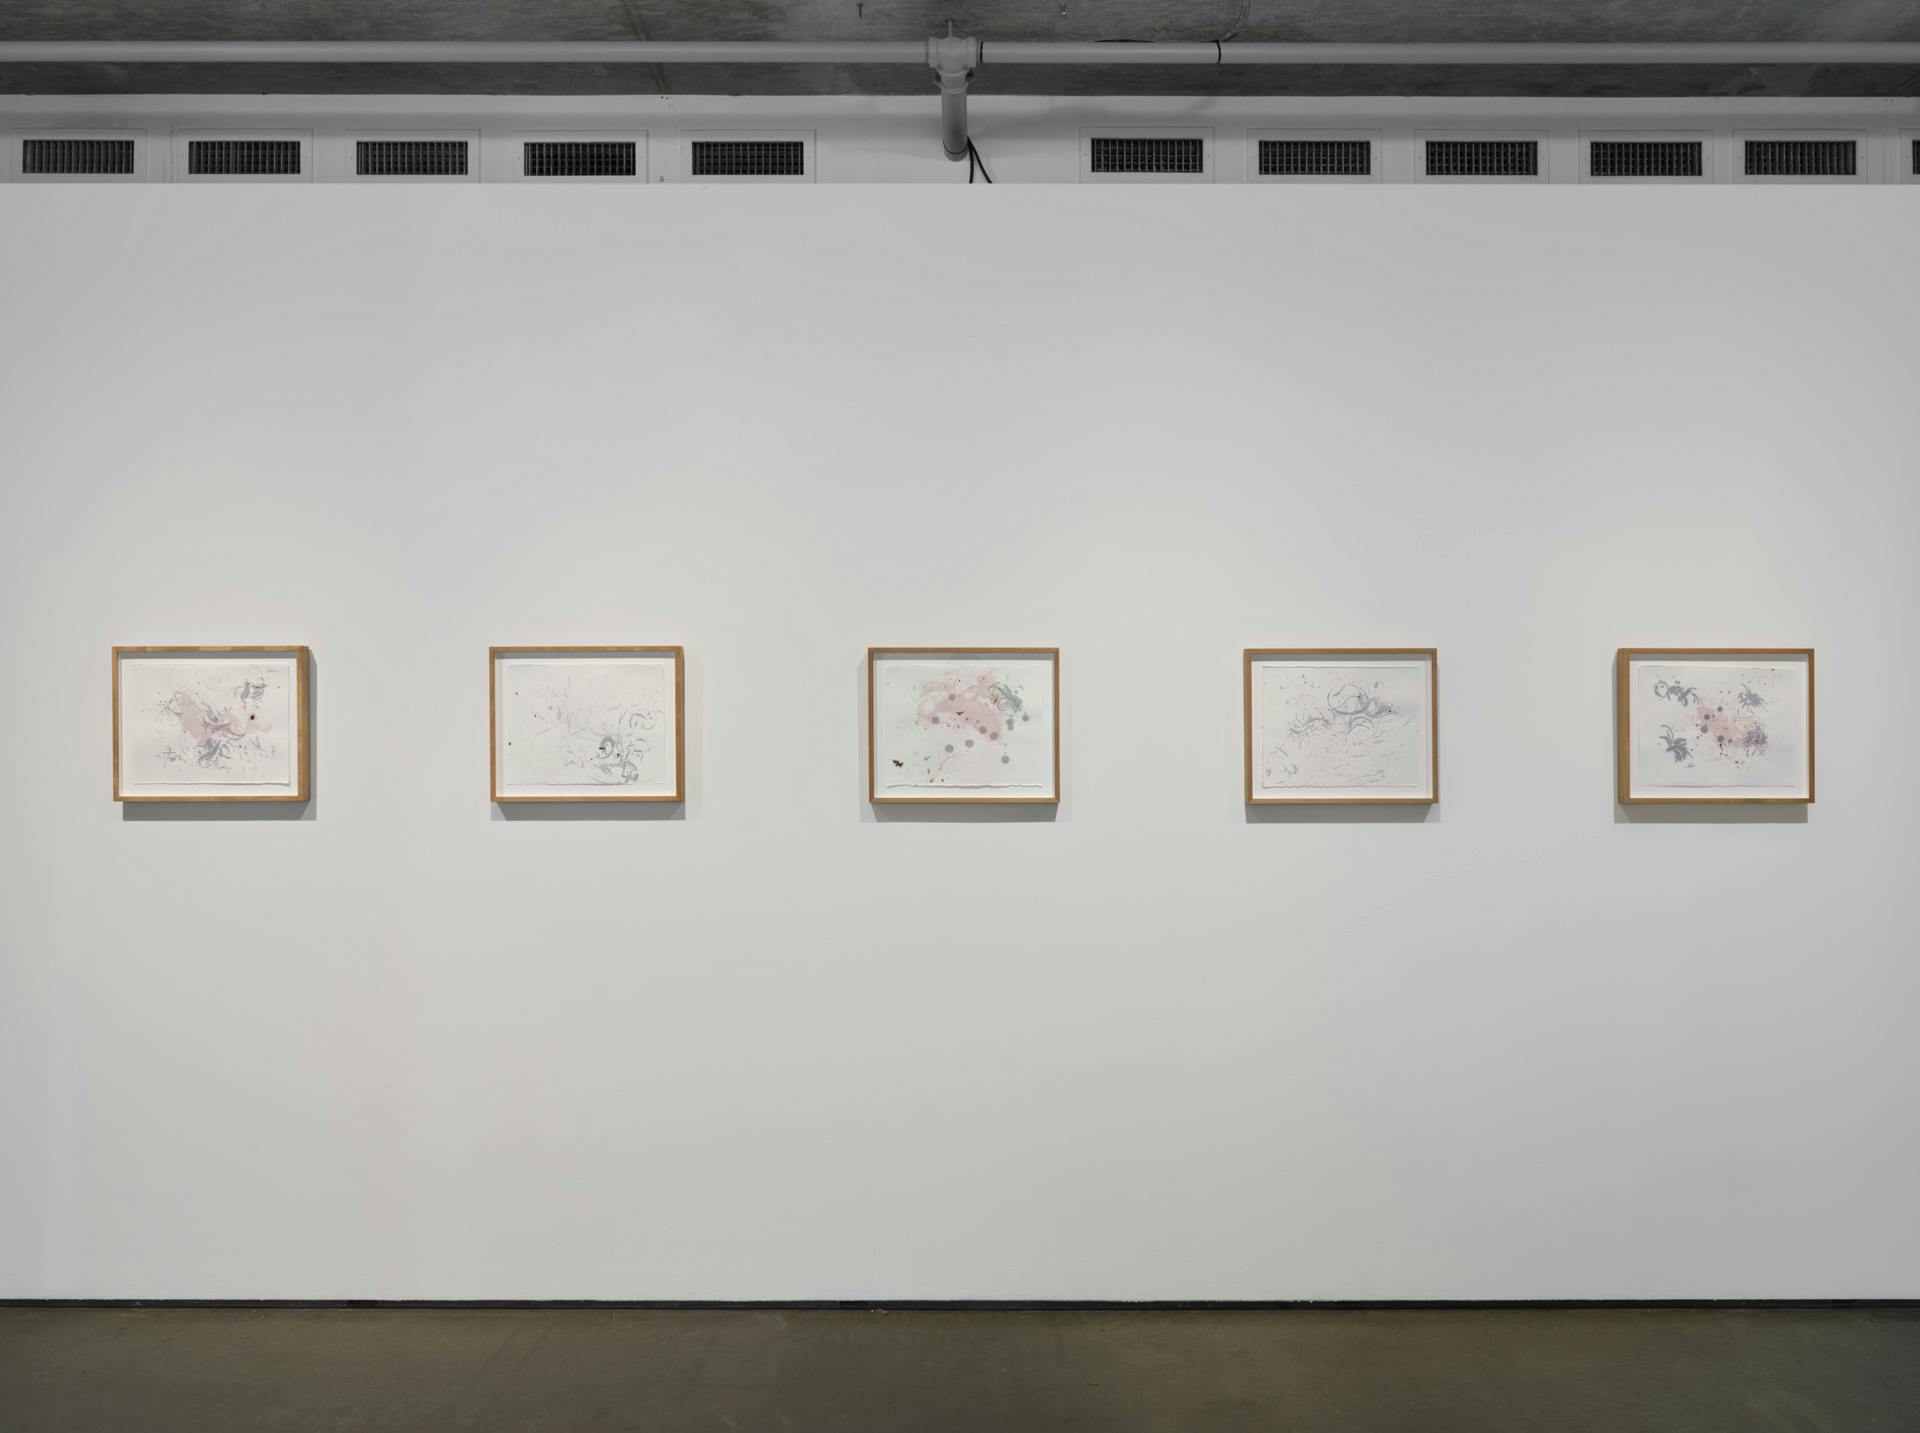 Five hairprints by Tanya Lukin Linklater arranged in a row on a white wall. Prints are in wood frames and feature grey, lavender-pink, and red marks in swirls and dots on white backgrounds.